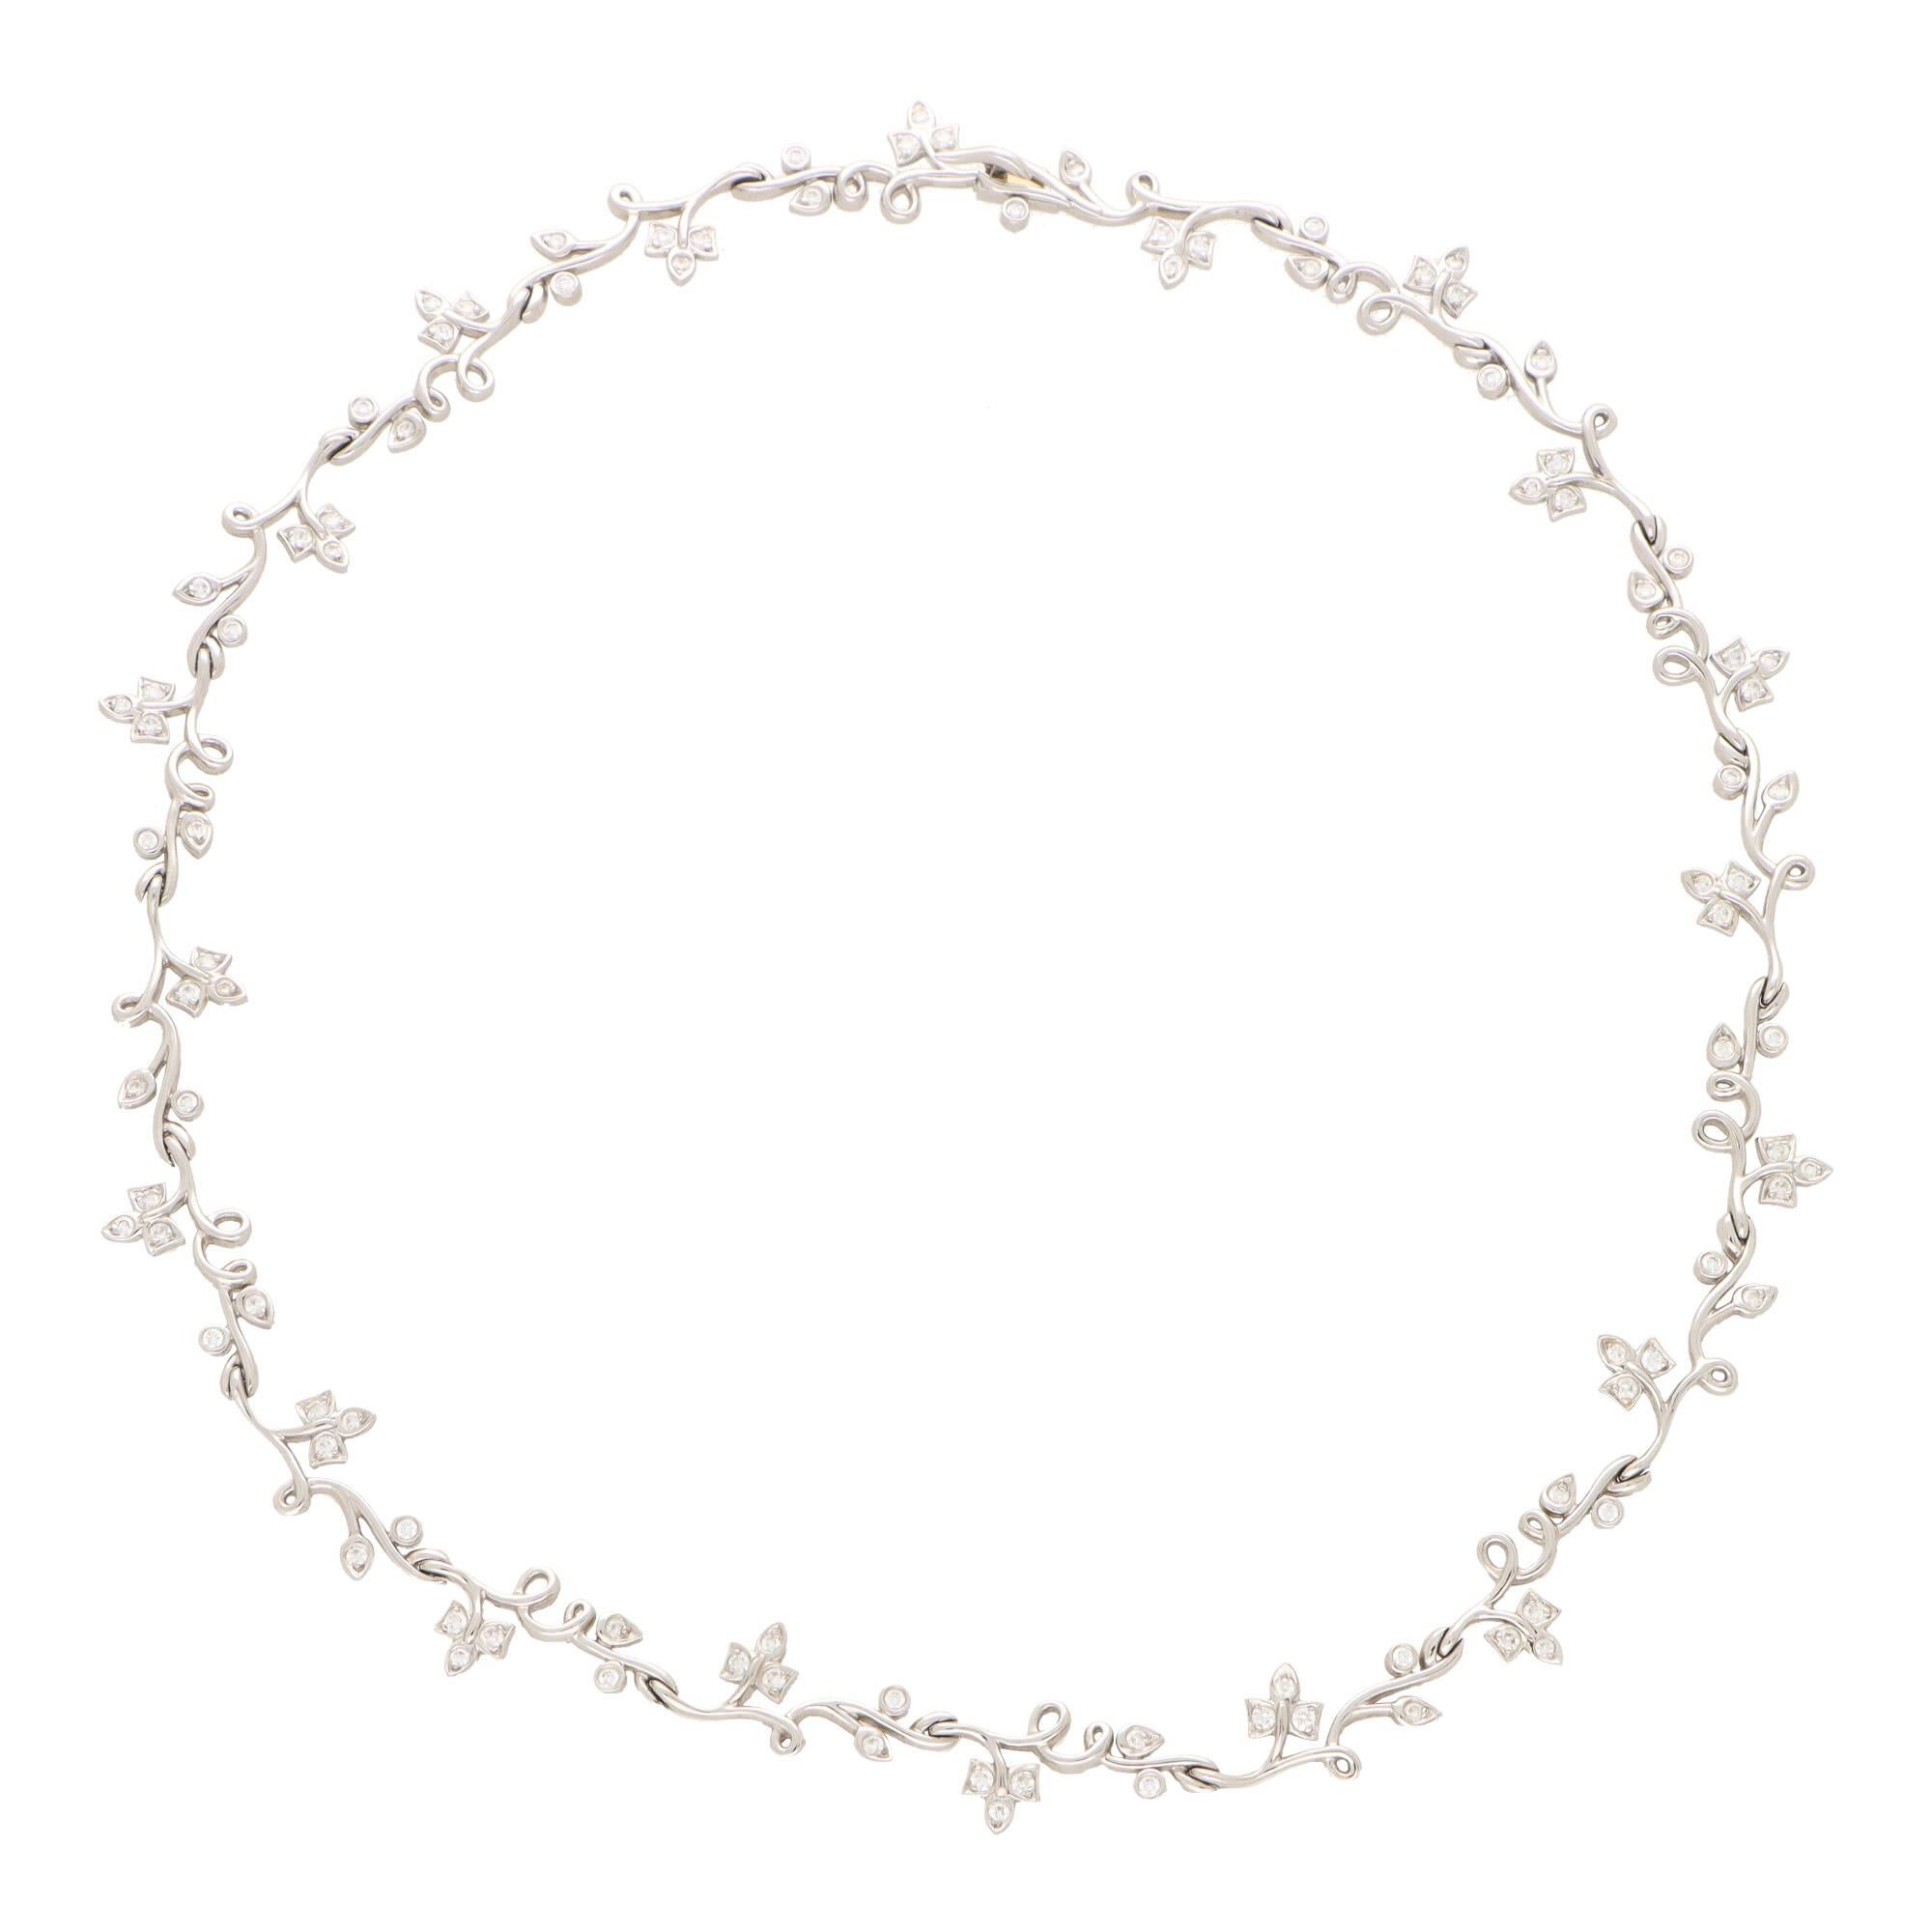 A beautiful vintage Tiffany & Co. twisted ‘Ivy’ diamond collar necklace set in platinum.

The necklace is composed of 20 individual diamond ivy styled links/panels and sits beautifully once on the neck. The necklace feels fabulous to wear and due to